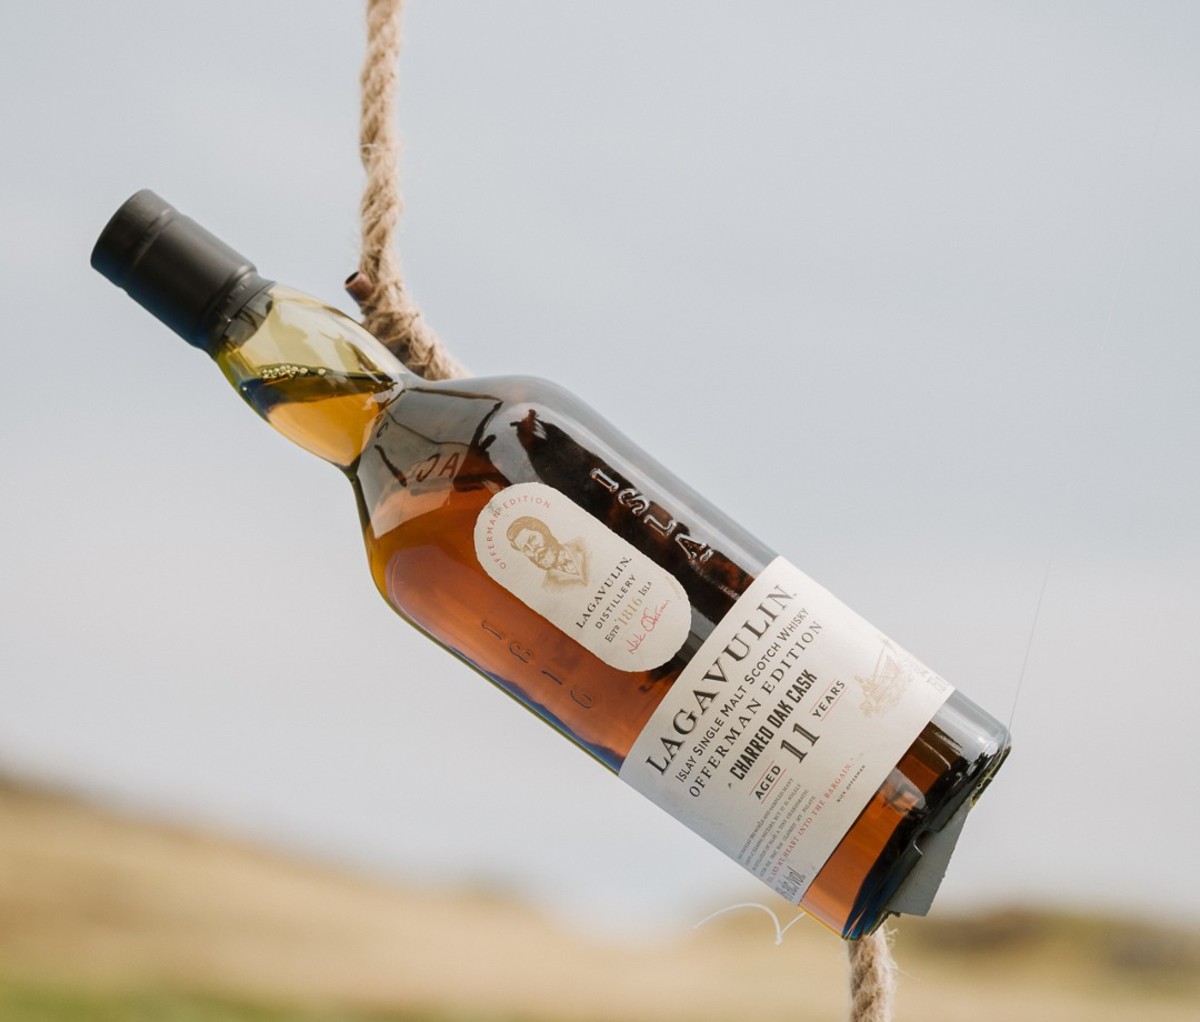 Bottle of Lagavulin Offerman Edition: Charred Oak Cask with rope around it